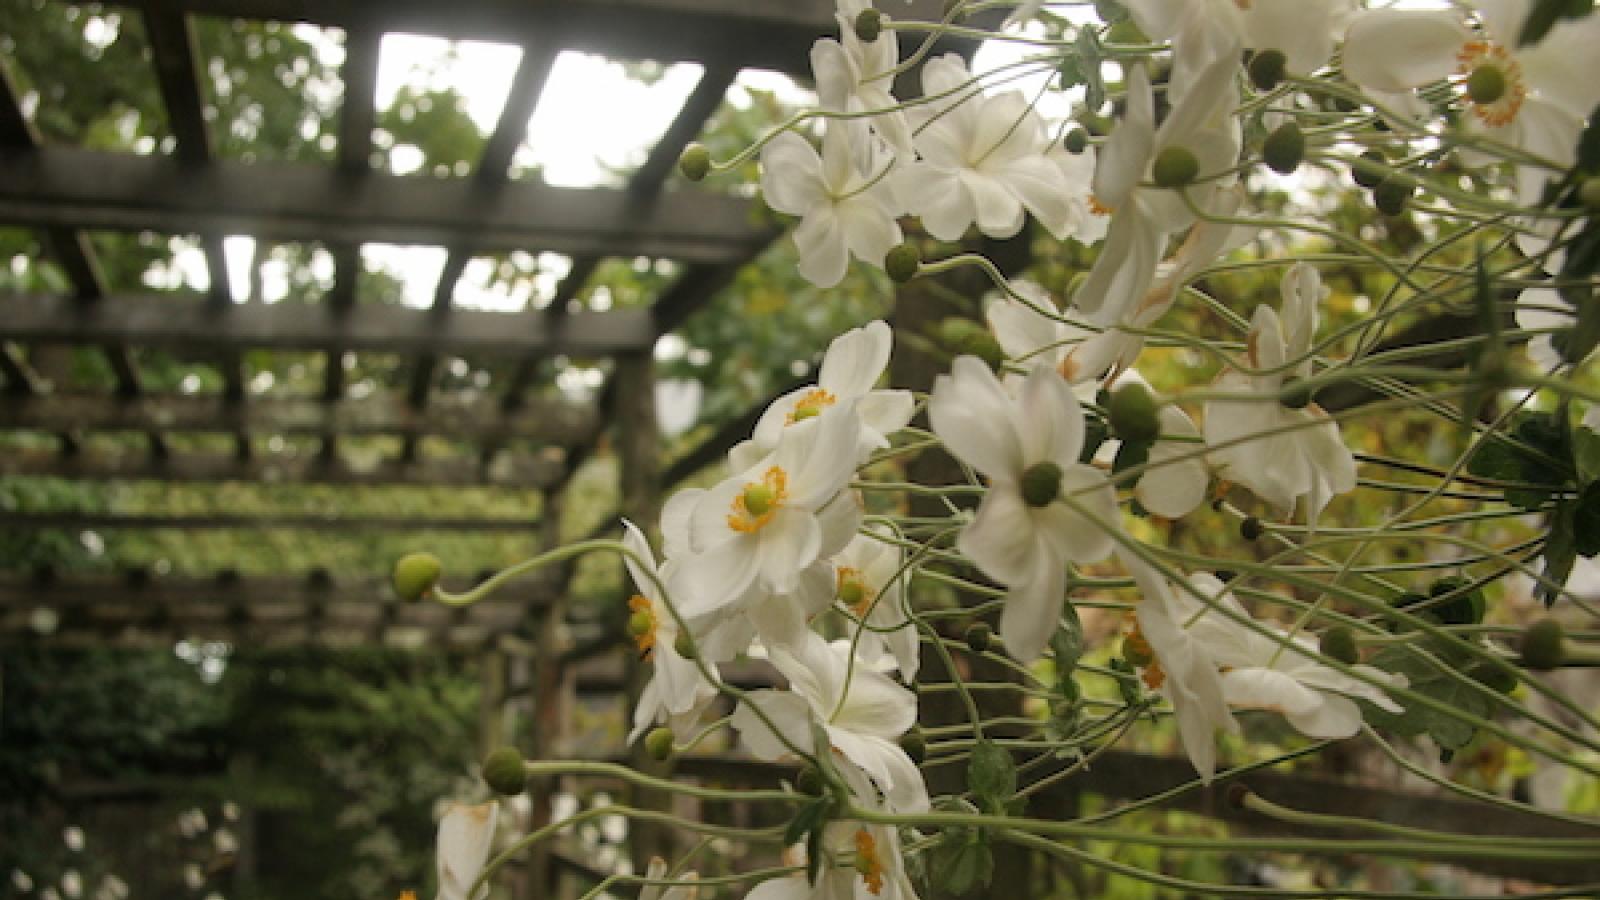 white flowers growing on a trellis in an arbor